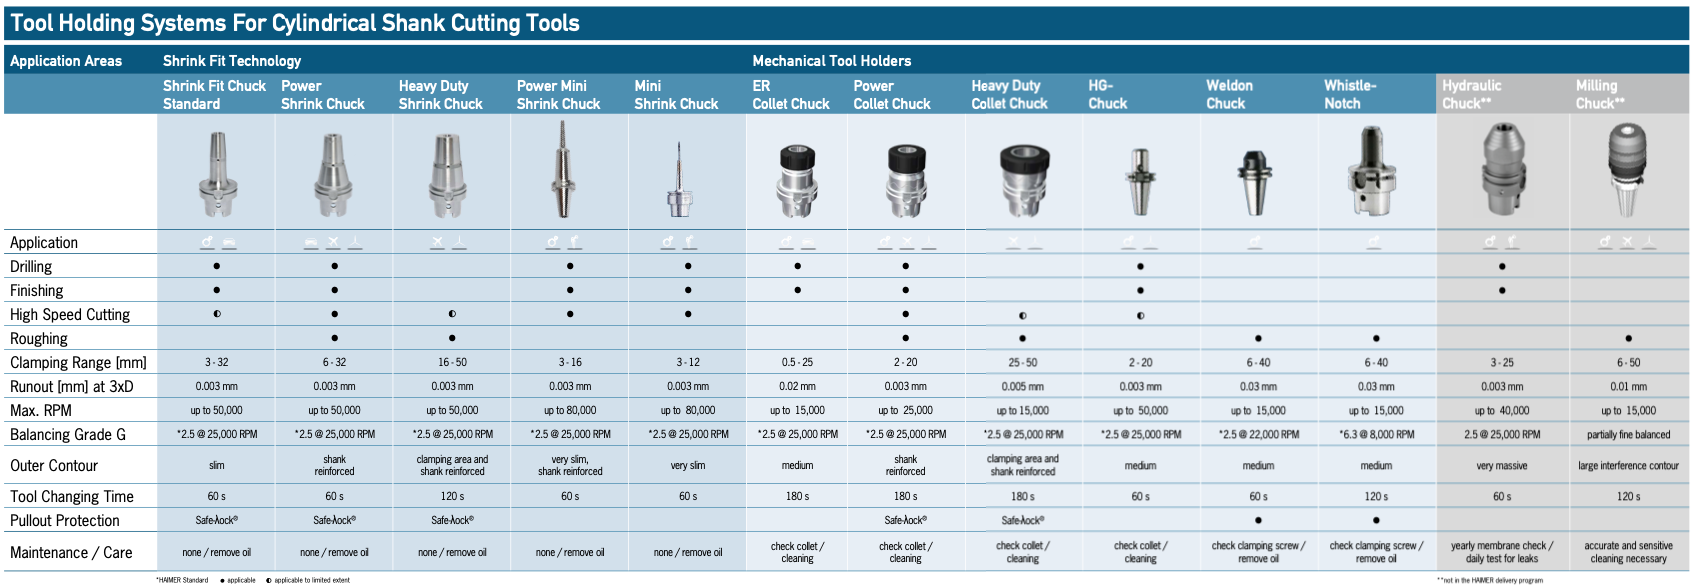  Tool Holding Systems For Cylindrical Shank Cutting Tools